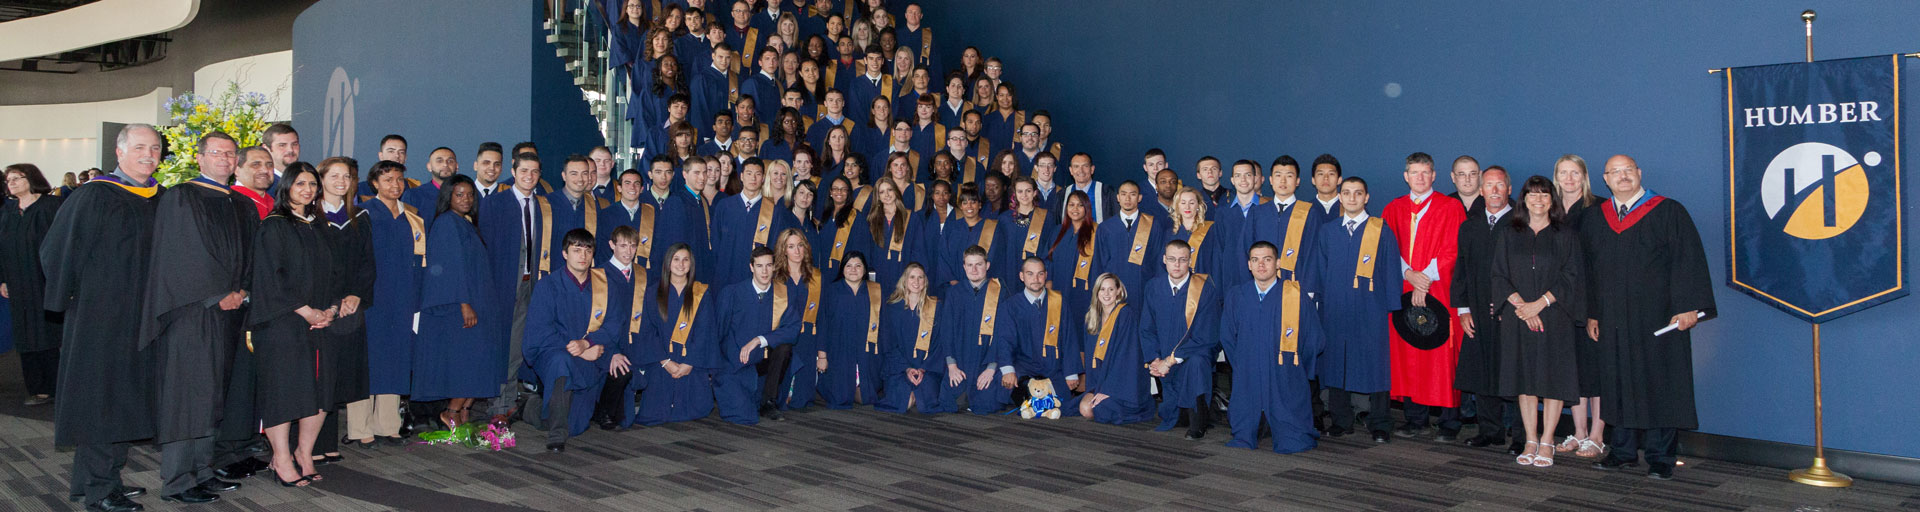 a large group of graduates in their regalia posing at a stairwell